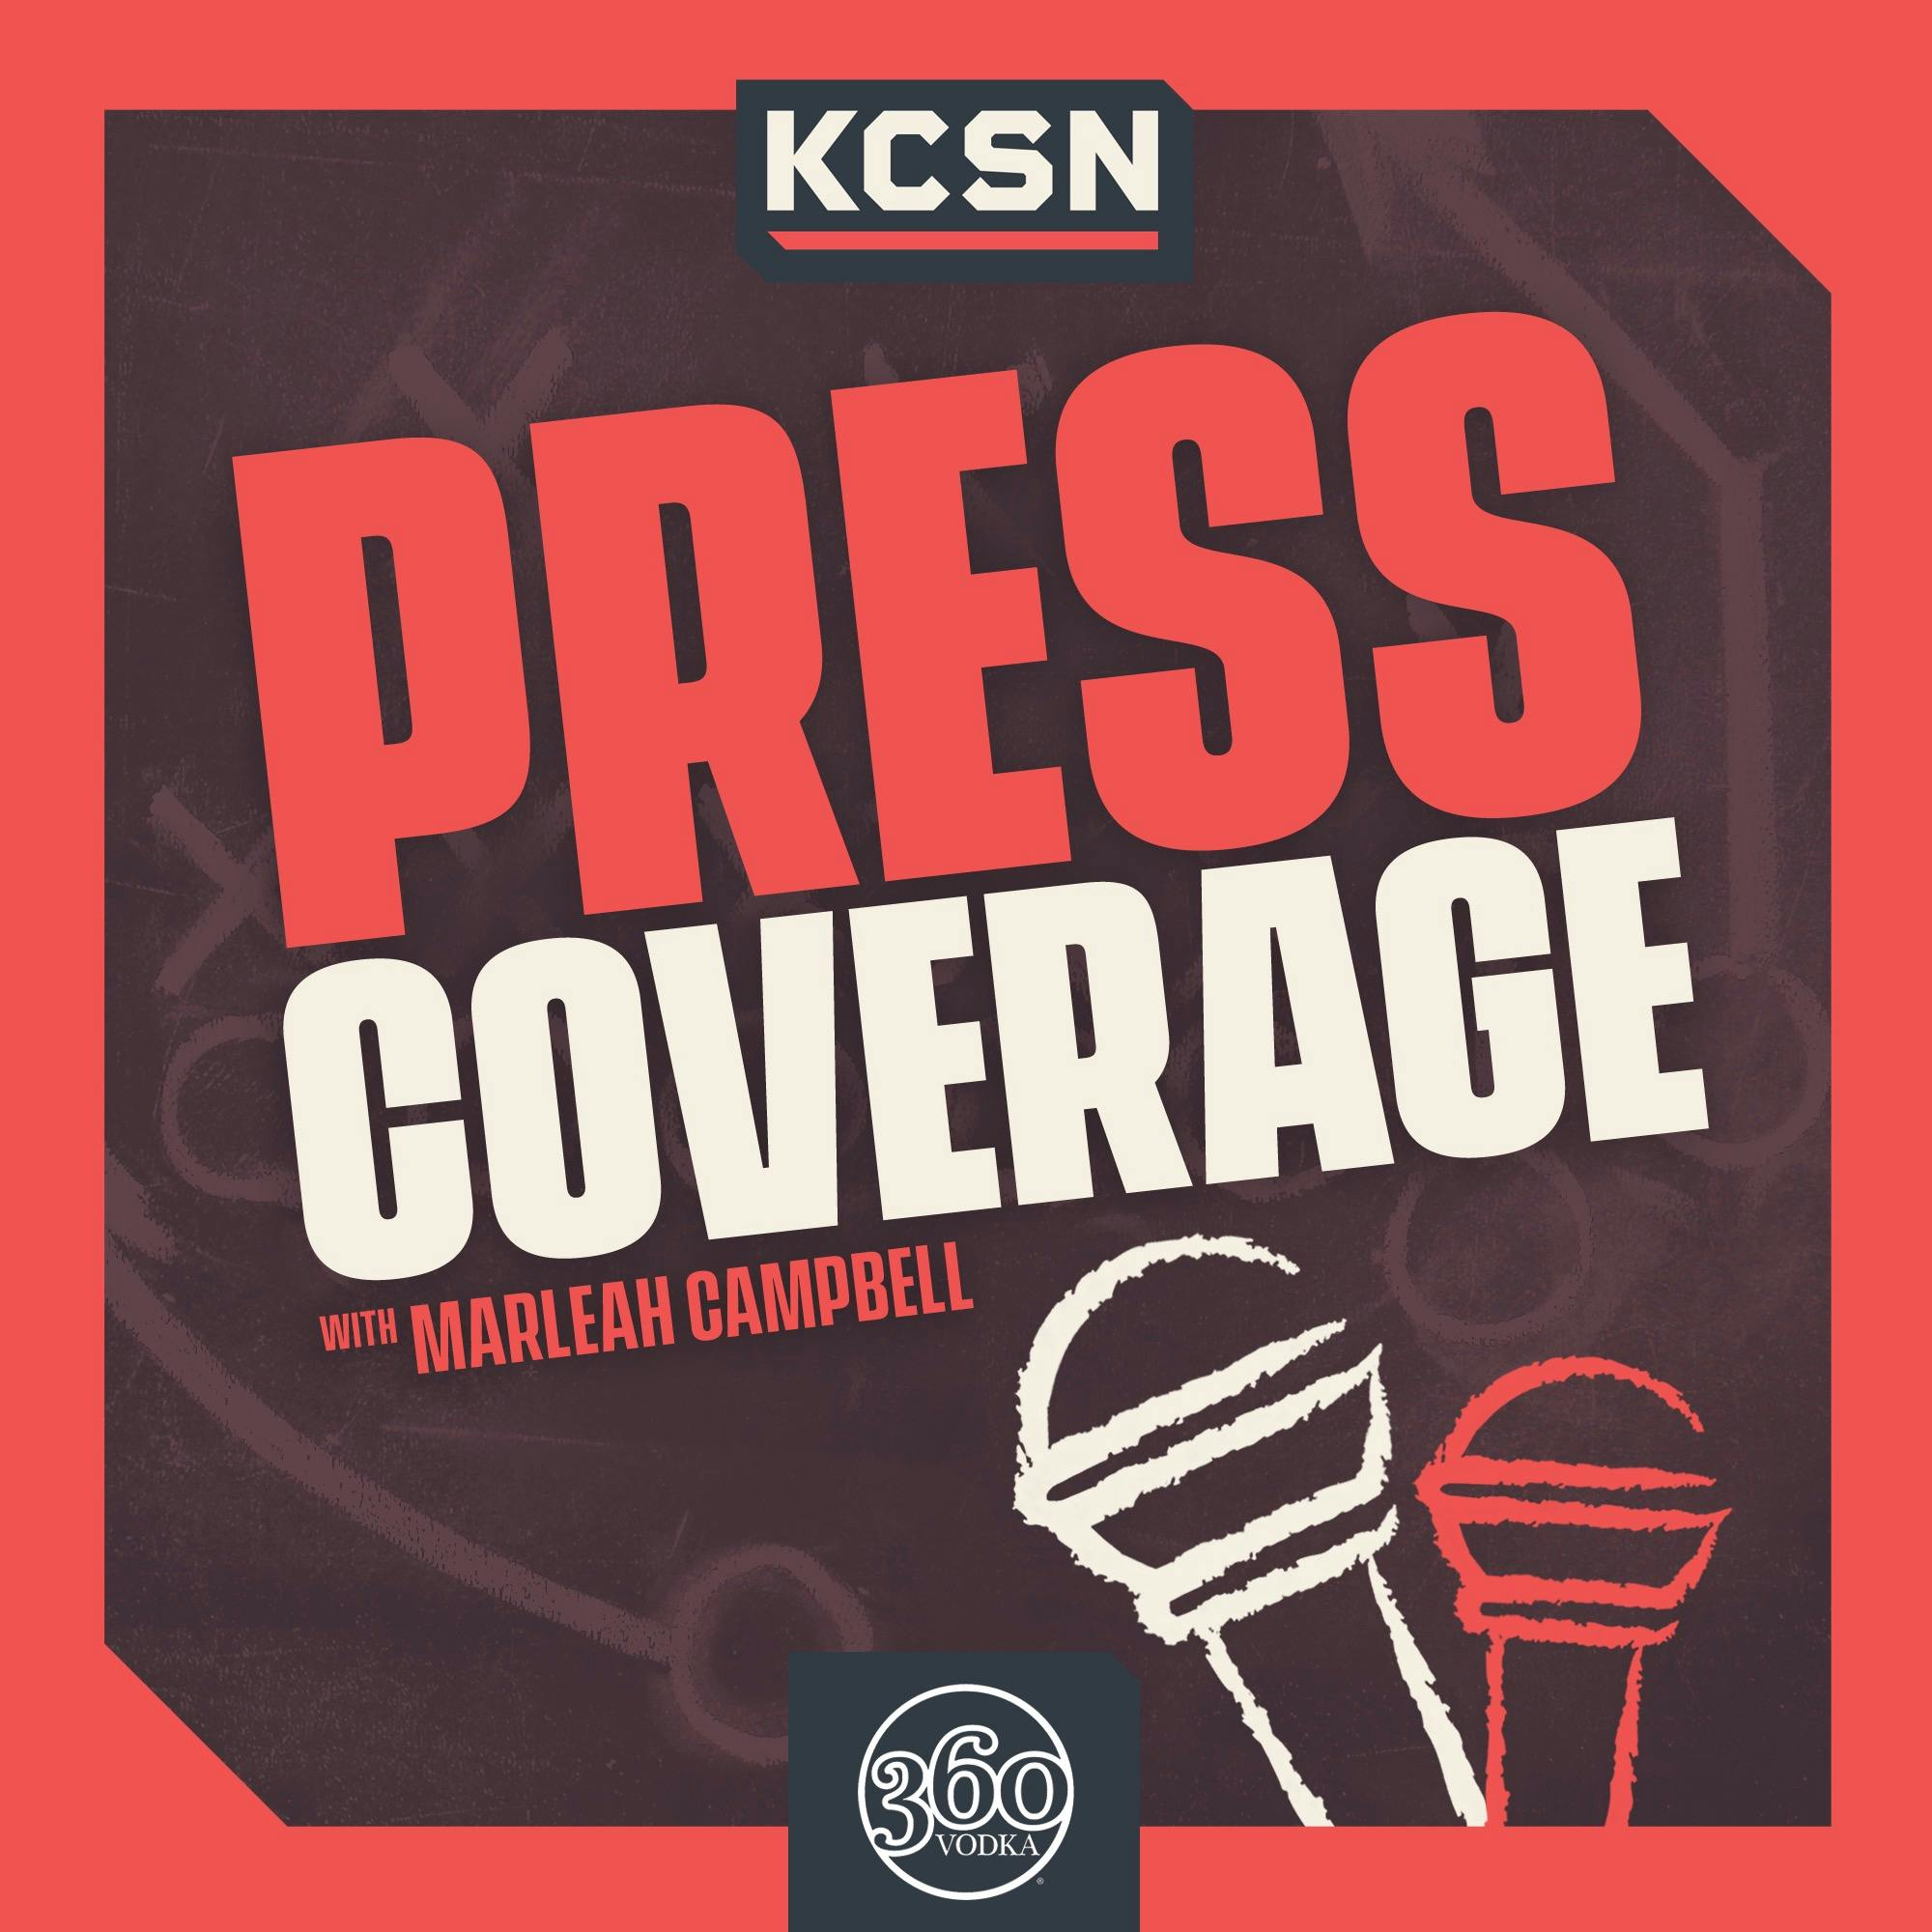 Press Coverage 1/28: Chiefs Embracing 